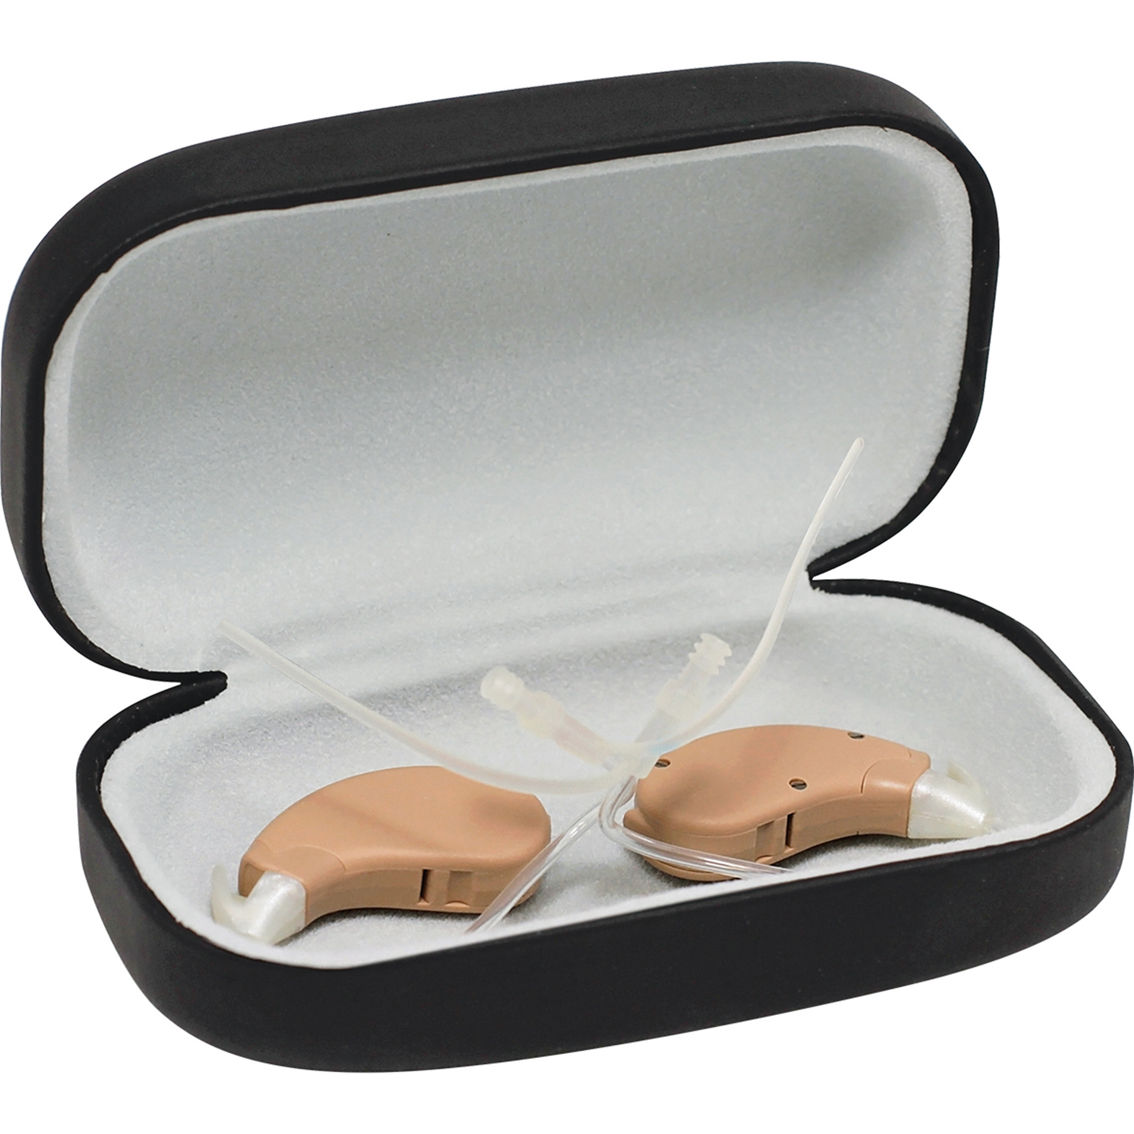 Lucid Hearing Enrich Pro OTC Behind the Ear Hearing Aid - Image 3 of 5